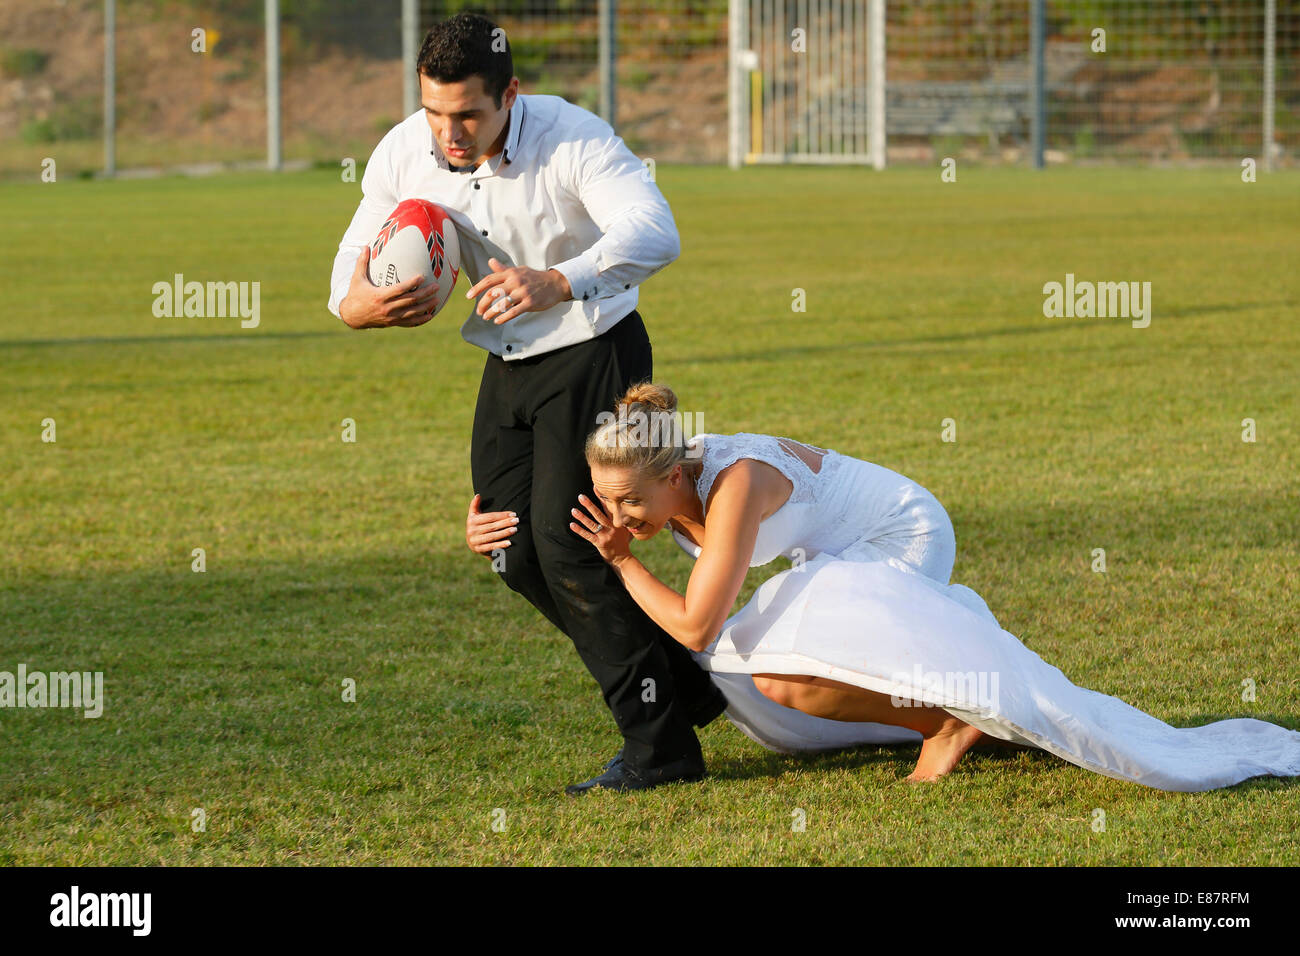 Trash the dress, bride and groom playing rugby, bride tackling the groom Stock Photo